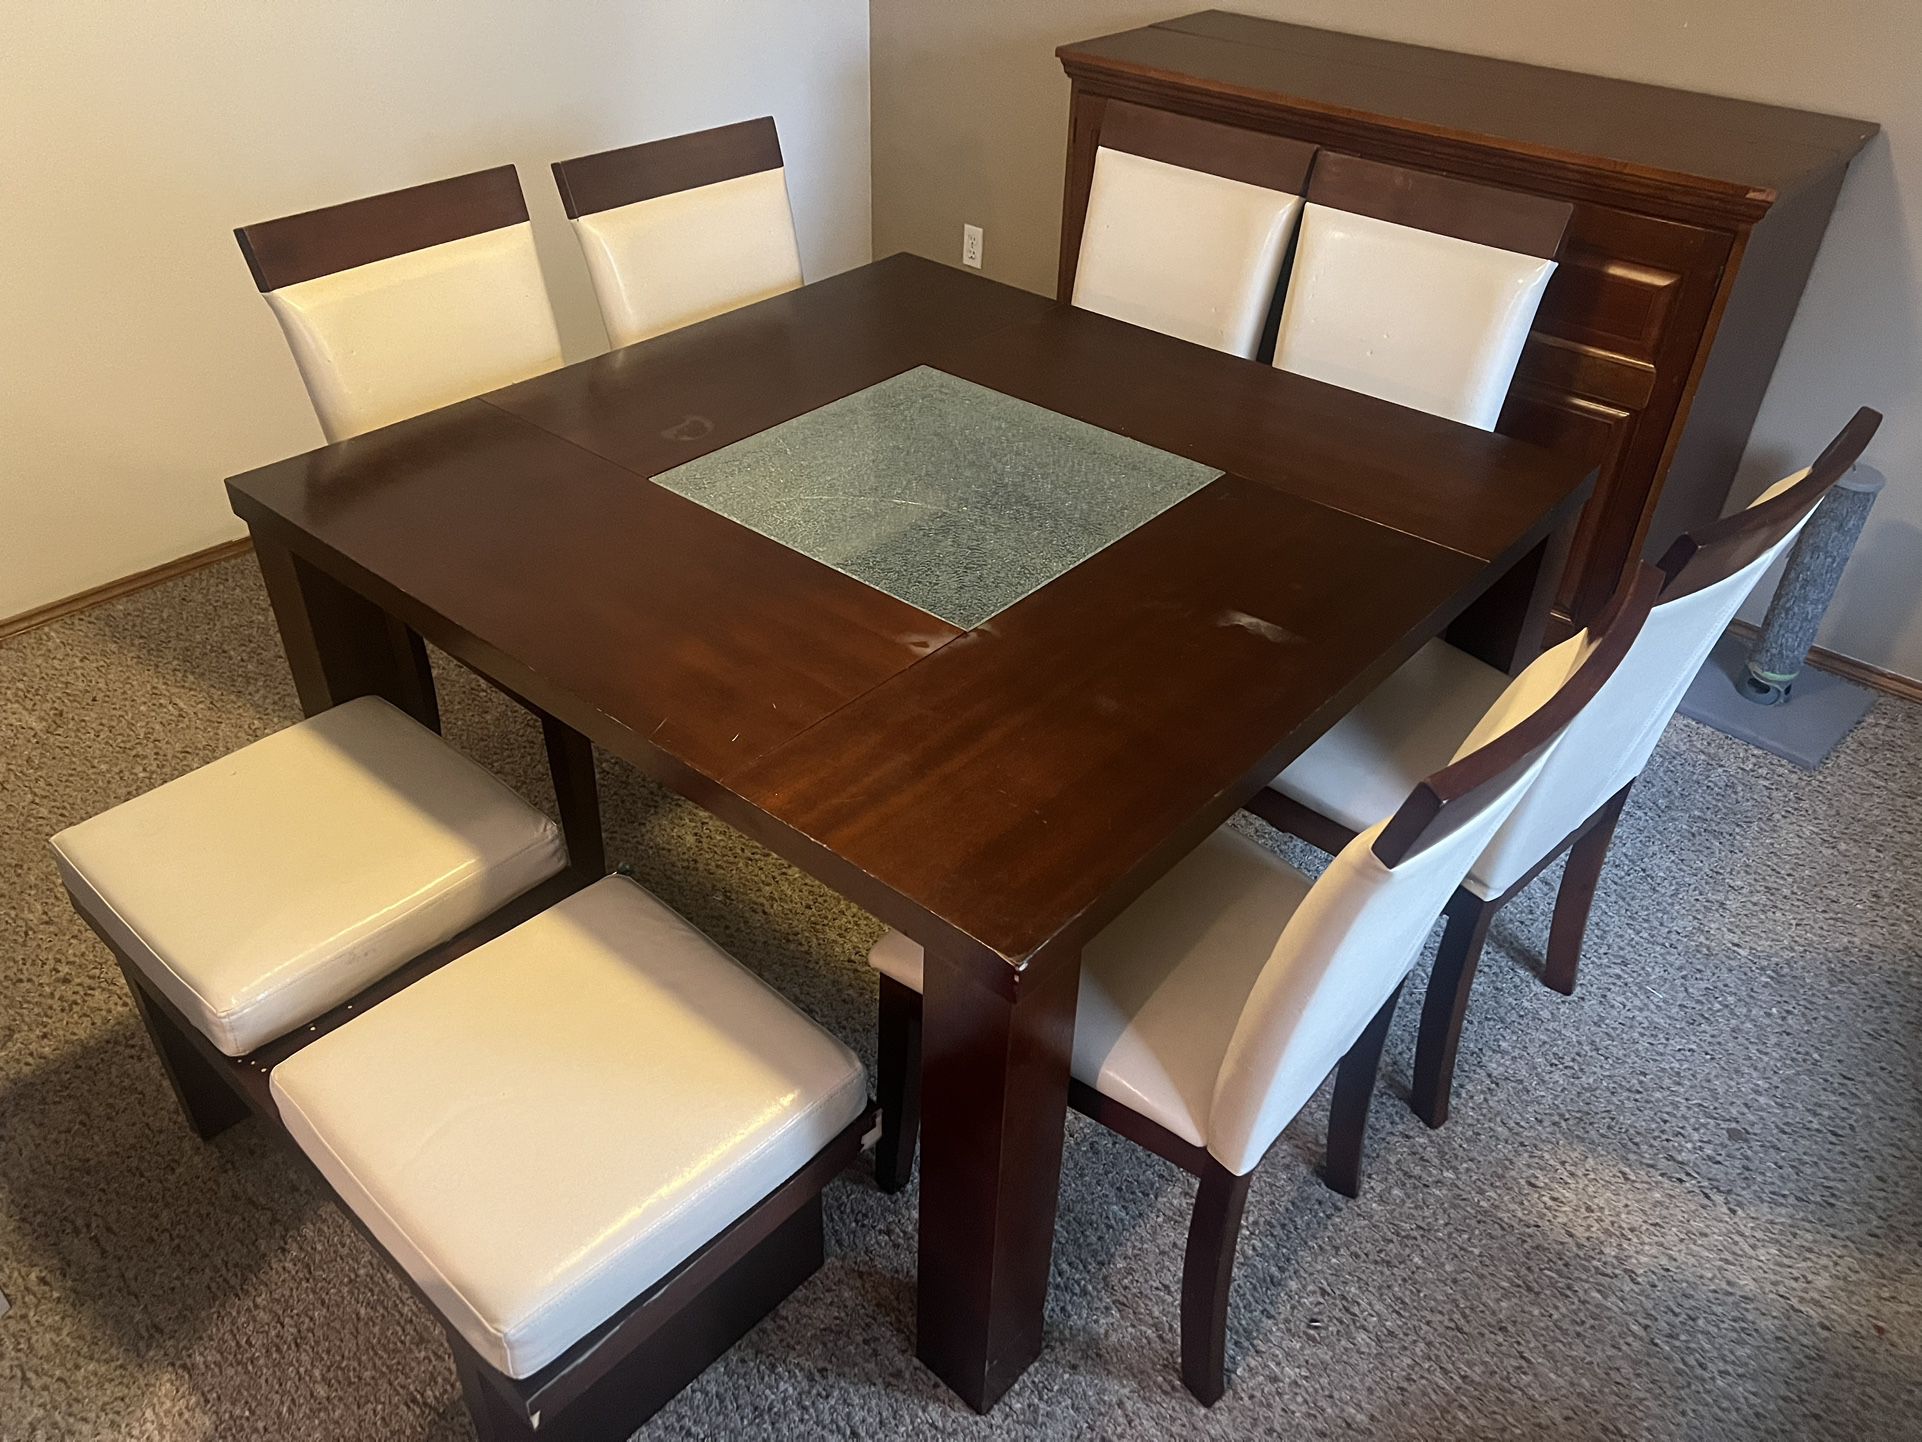 Table, 8 chairs and wood furniture